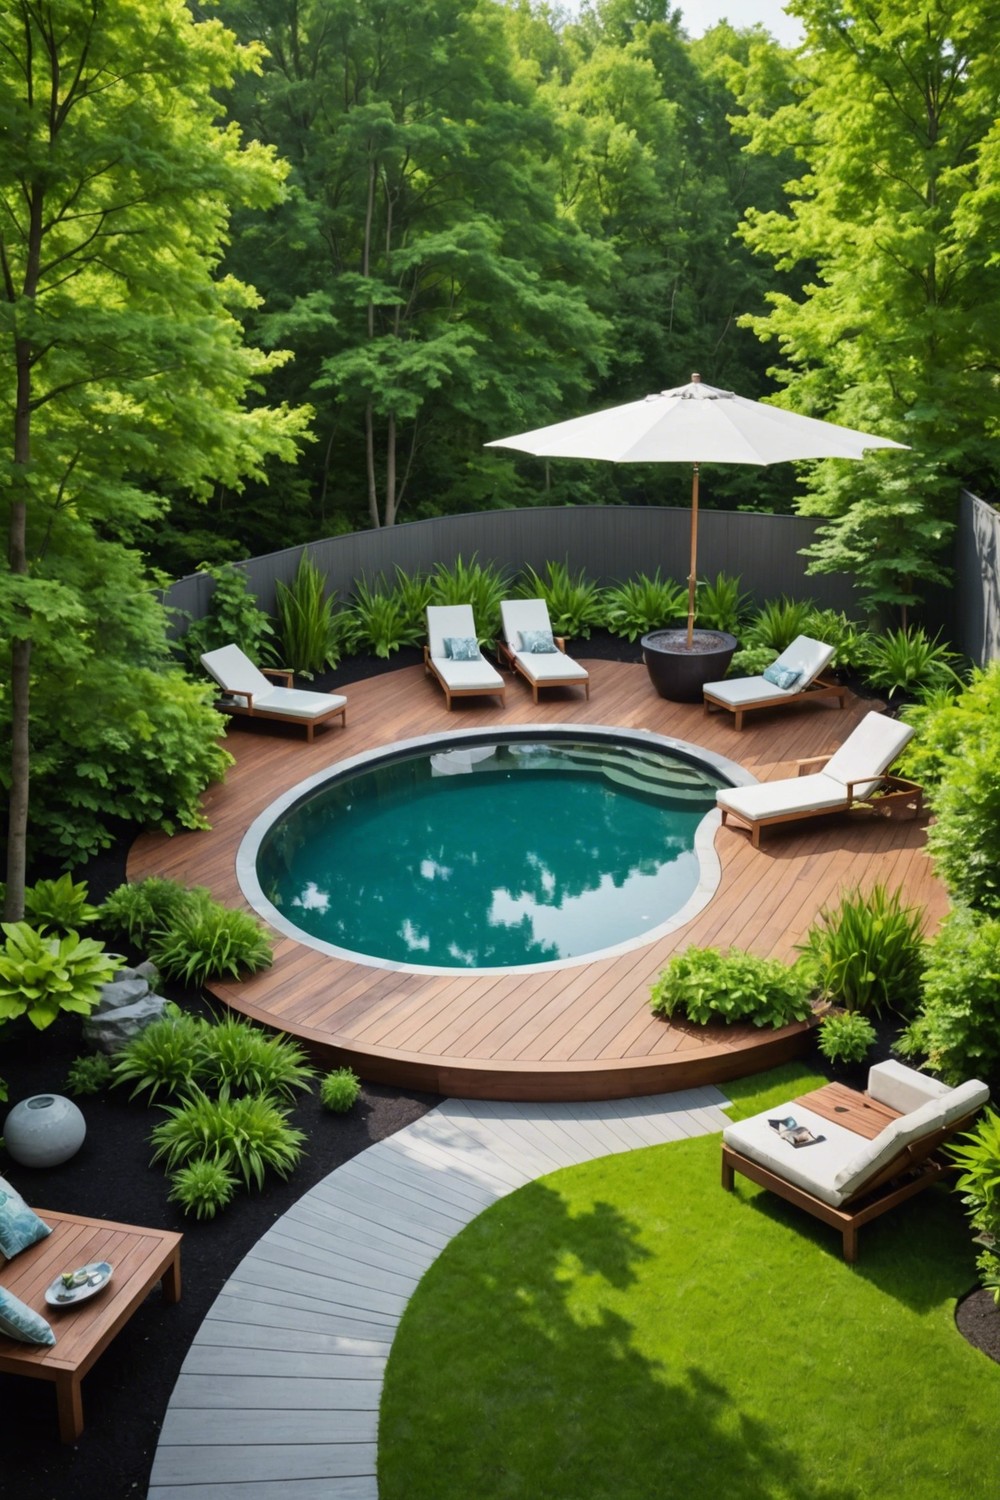 Modern Floating Decks for Above-Ground Pools